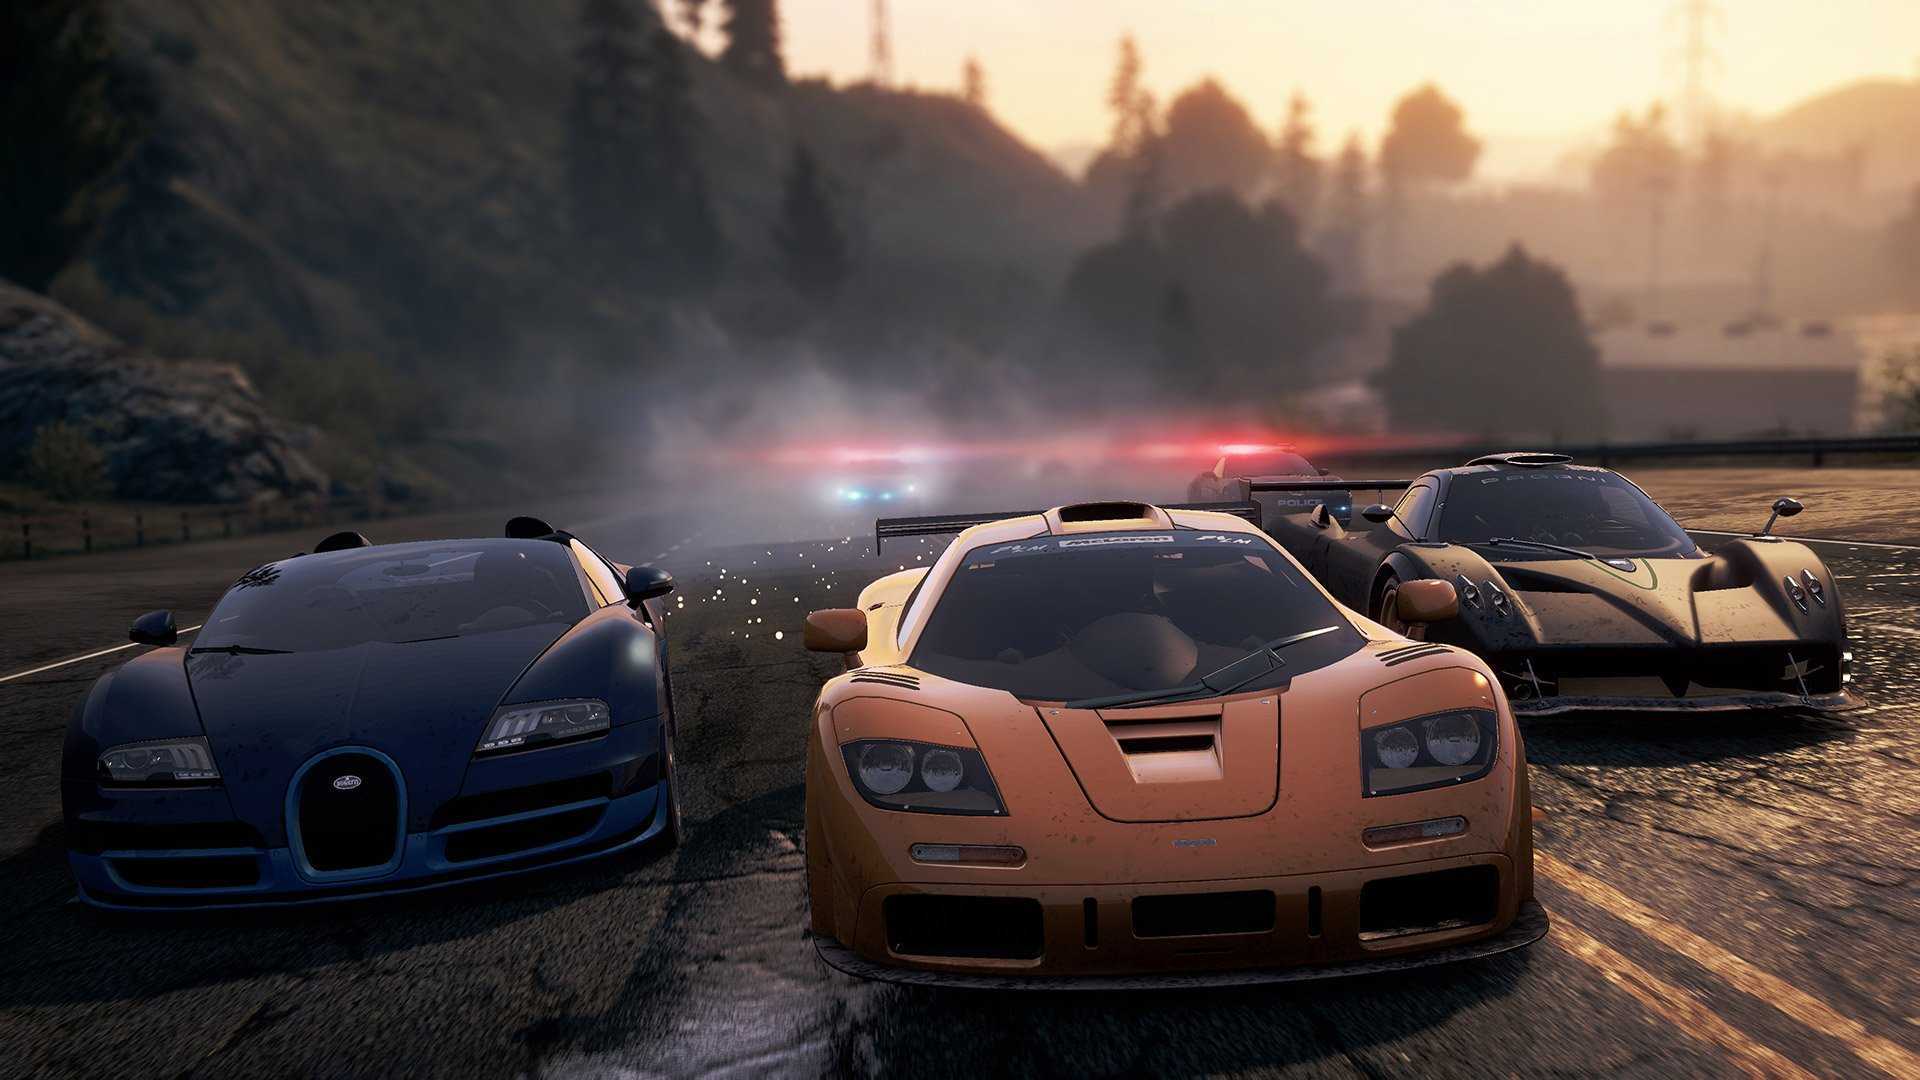 Need for Speed 2022. NFS most wanted. Need for Speed most wanted 2012. Нфс 2022 геймплей.